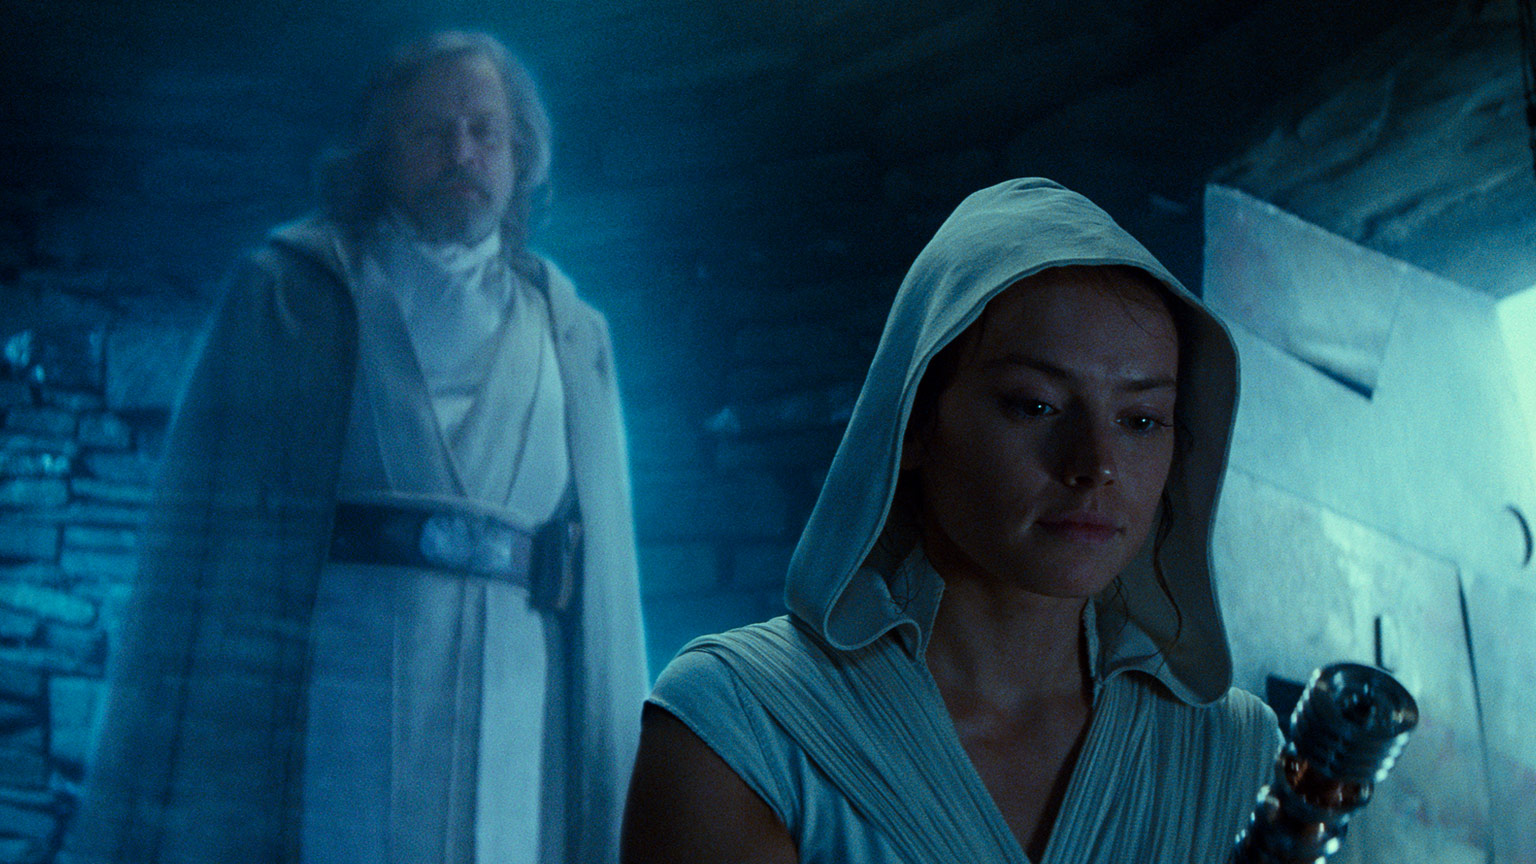 Quiz: Complete the Quote from the Star Wars Jedi!